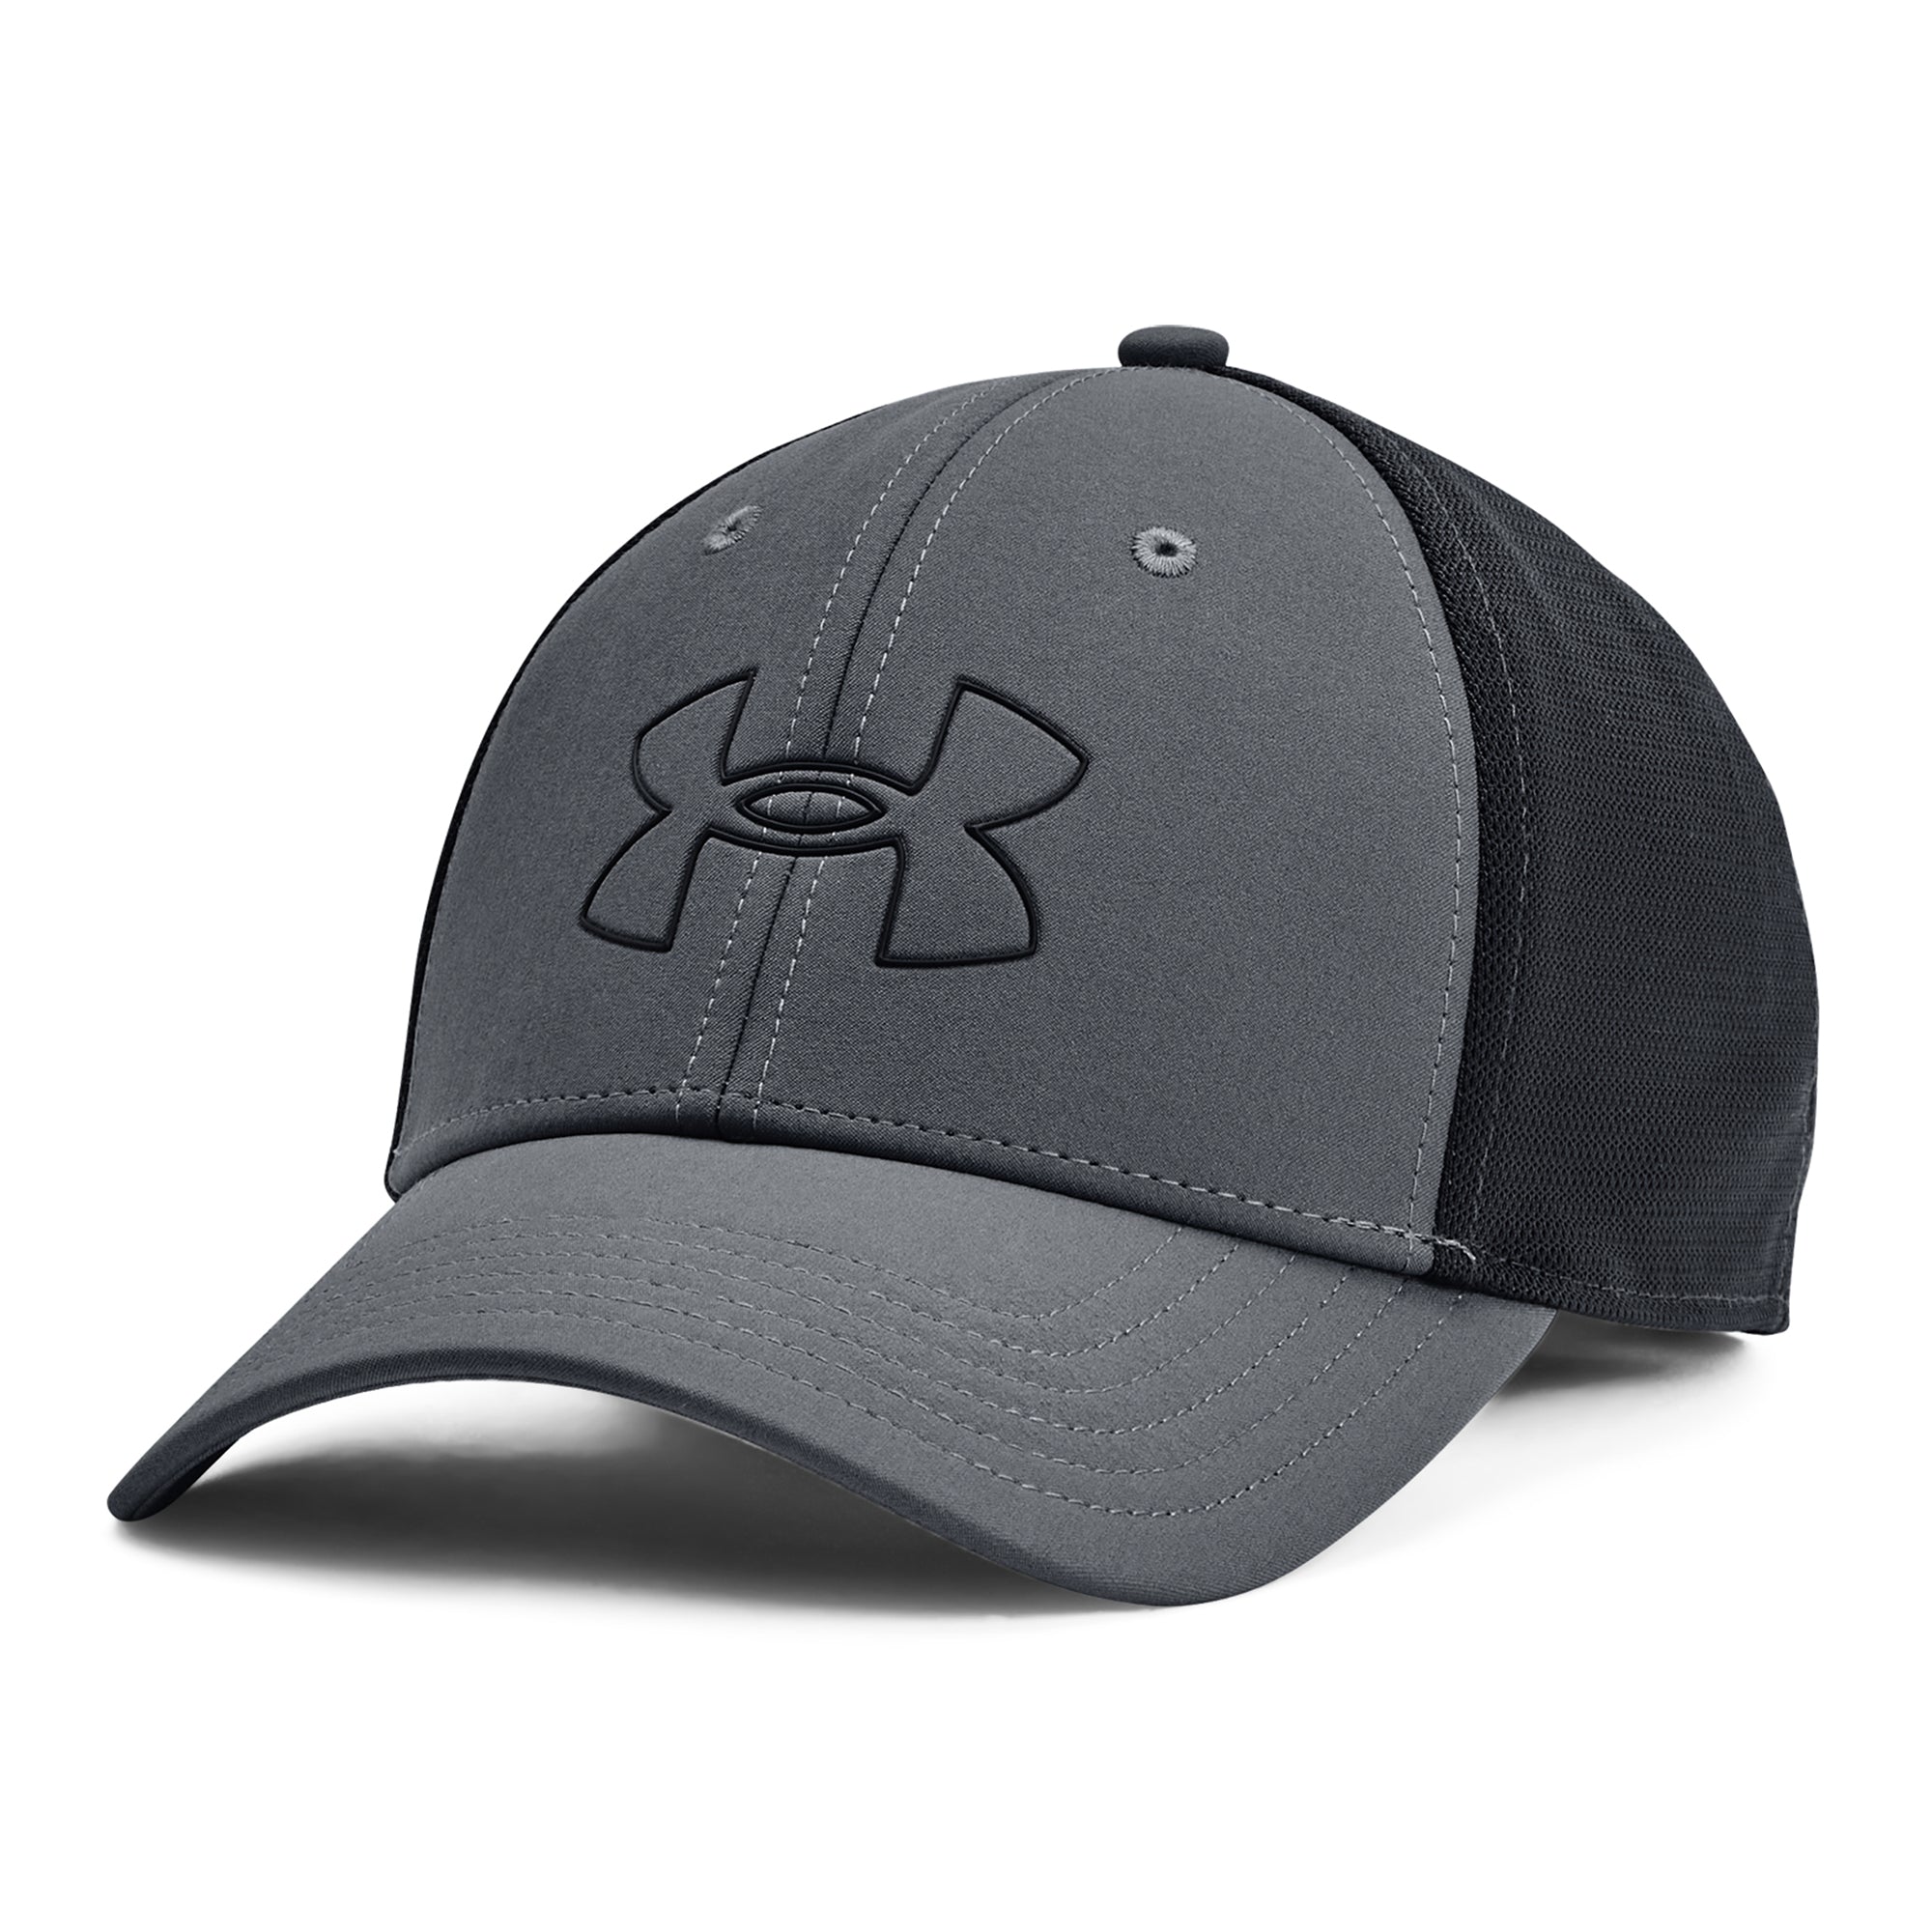 Under Armour Mens ISO Cap Static Blue/Lime Surge - Clothing from Gamola Golf  Ltd UK